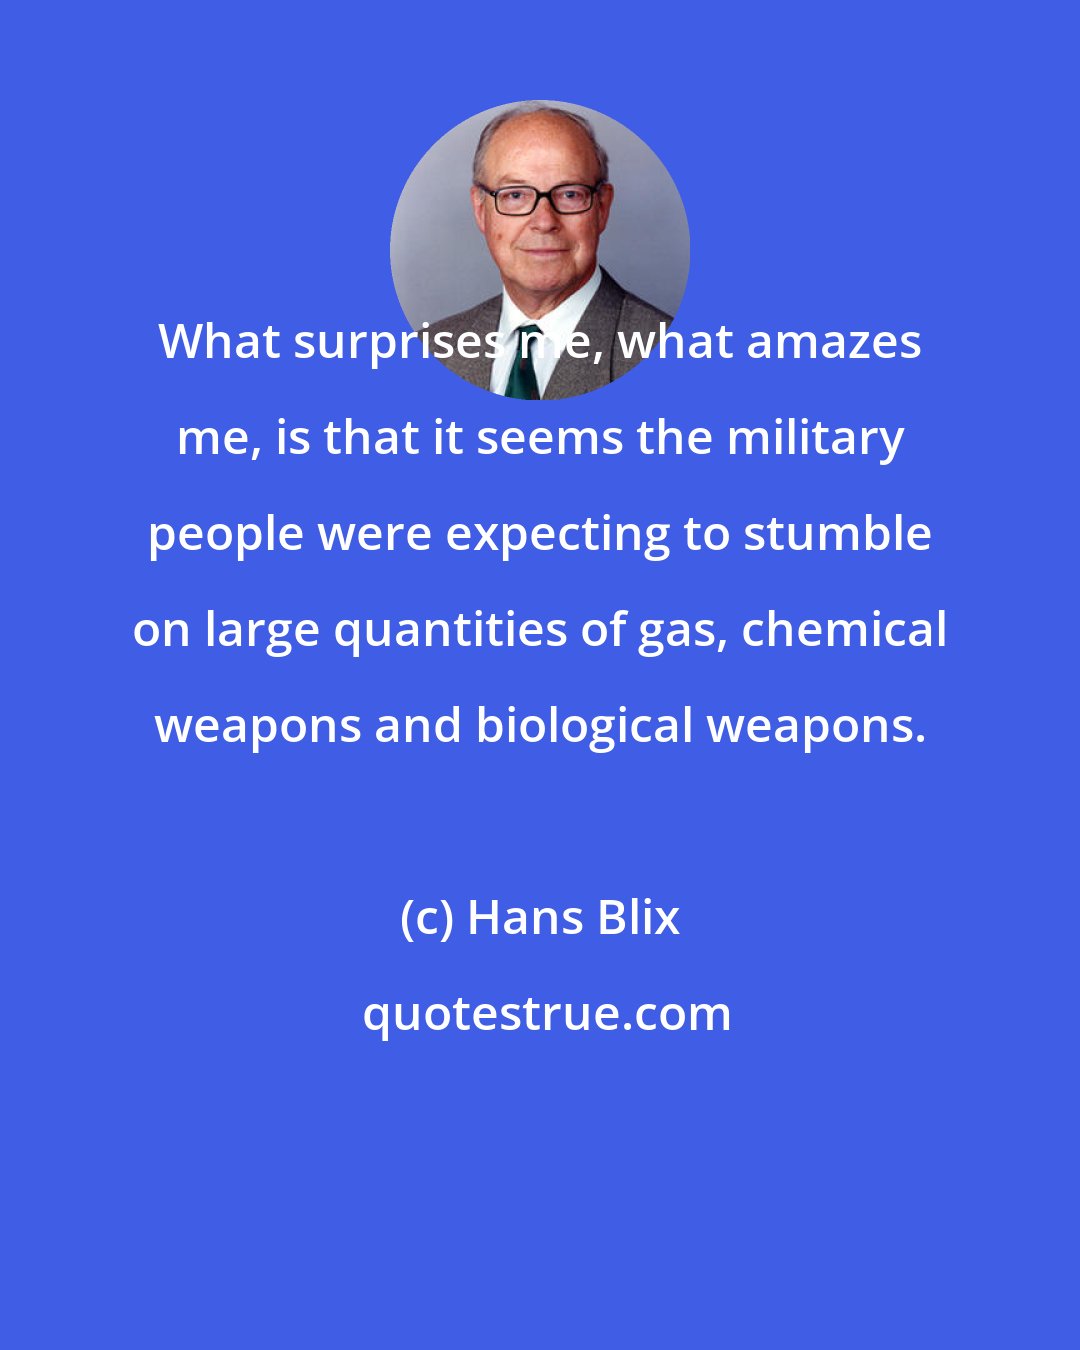 Hans Blix: What surprises me, what amazes me, is that it seems the military people were expecting to stumble on large quantities of gas, chemical weapons and biological weapons.